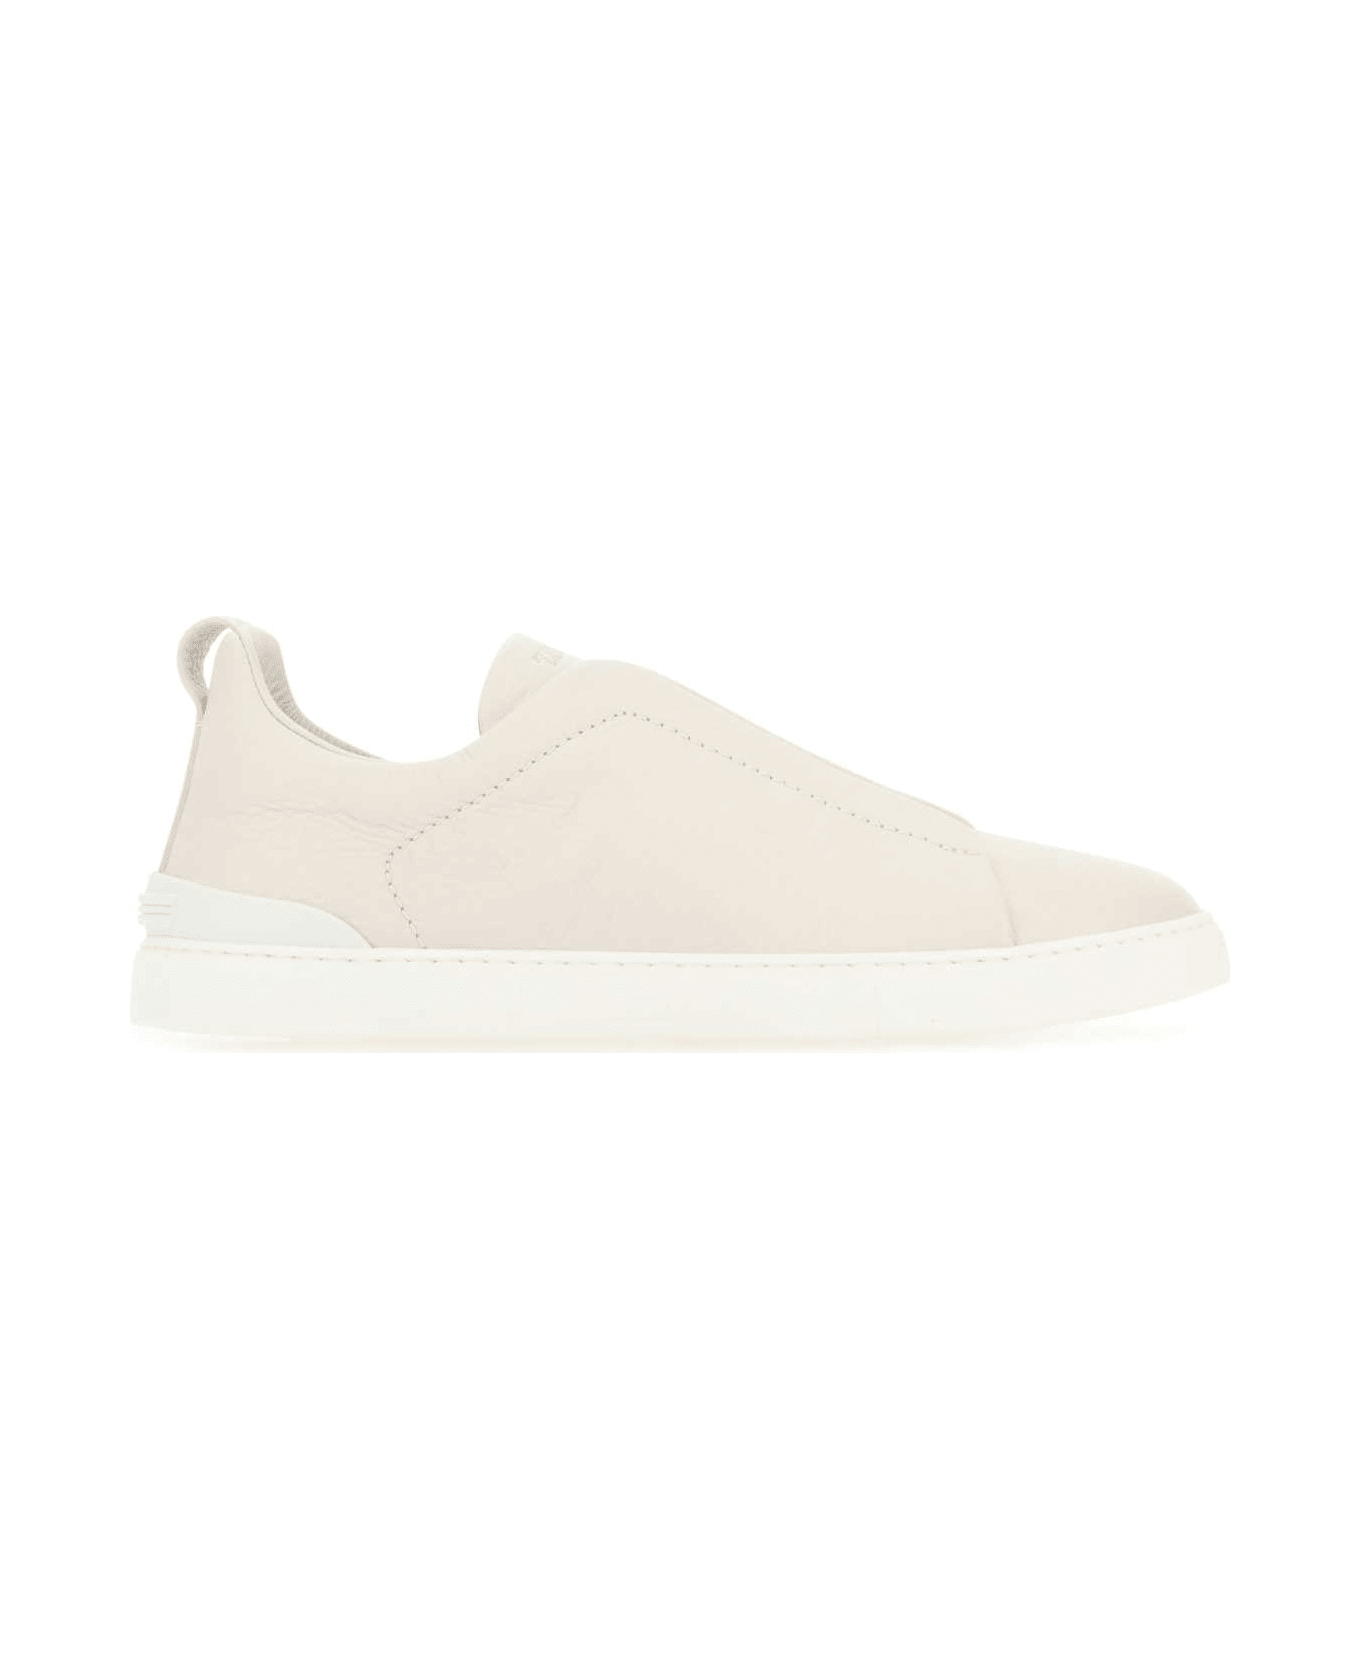 Zegna Ivory Leather Slip Ons - PAN